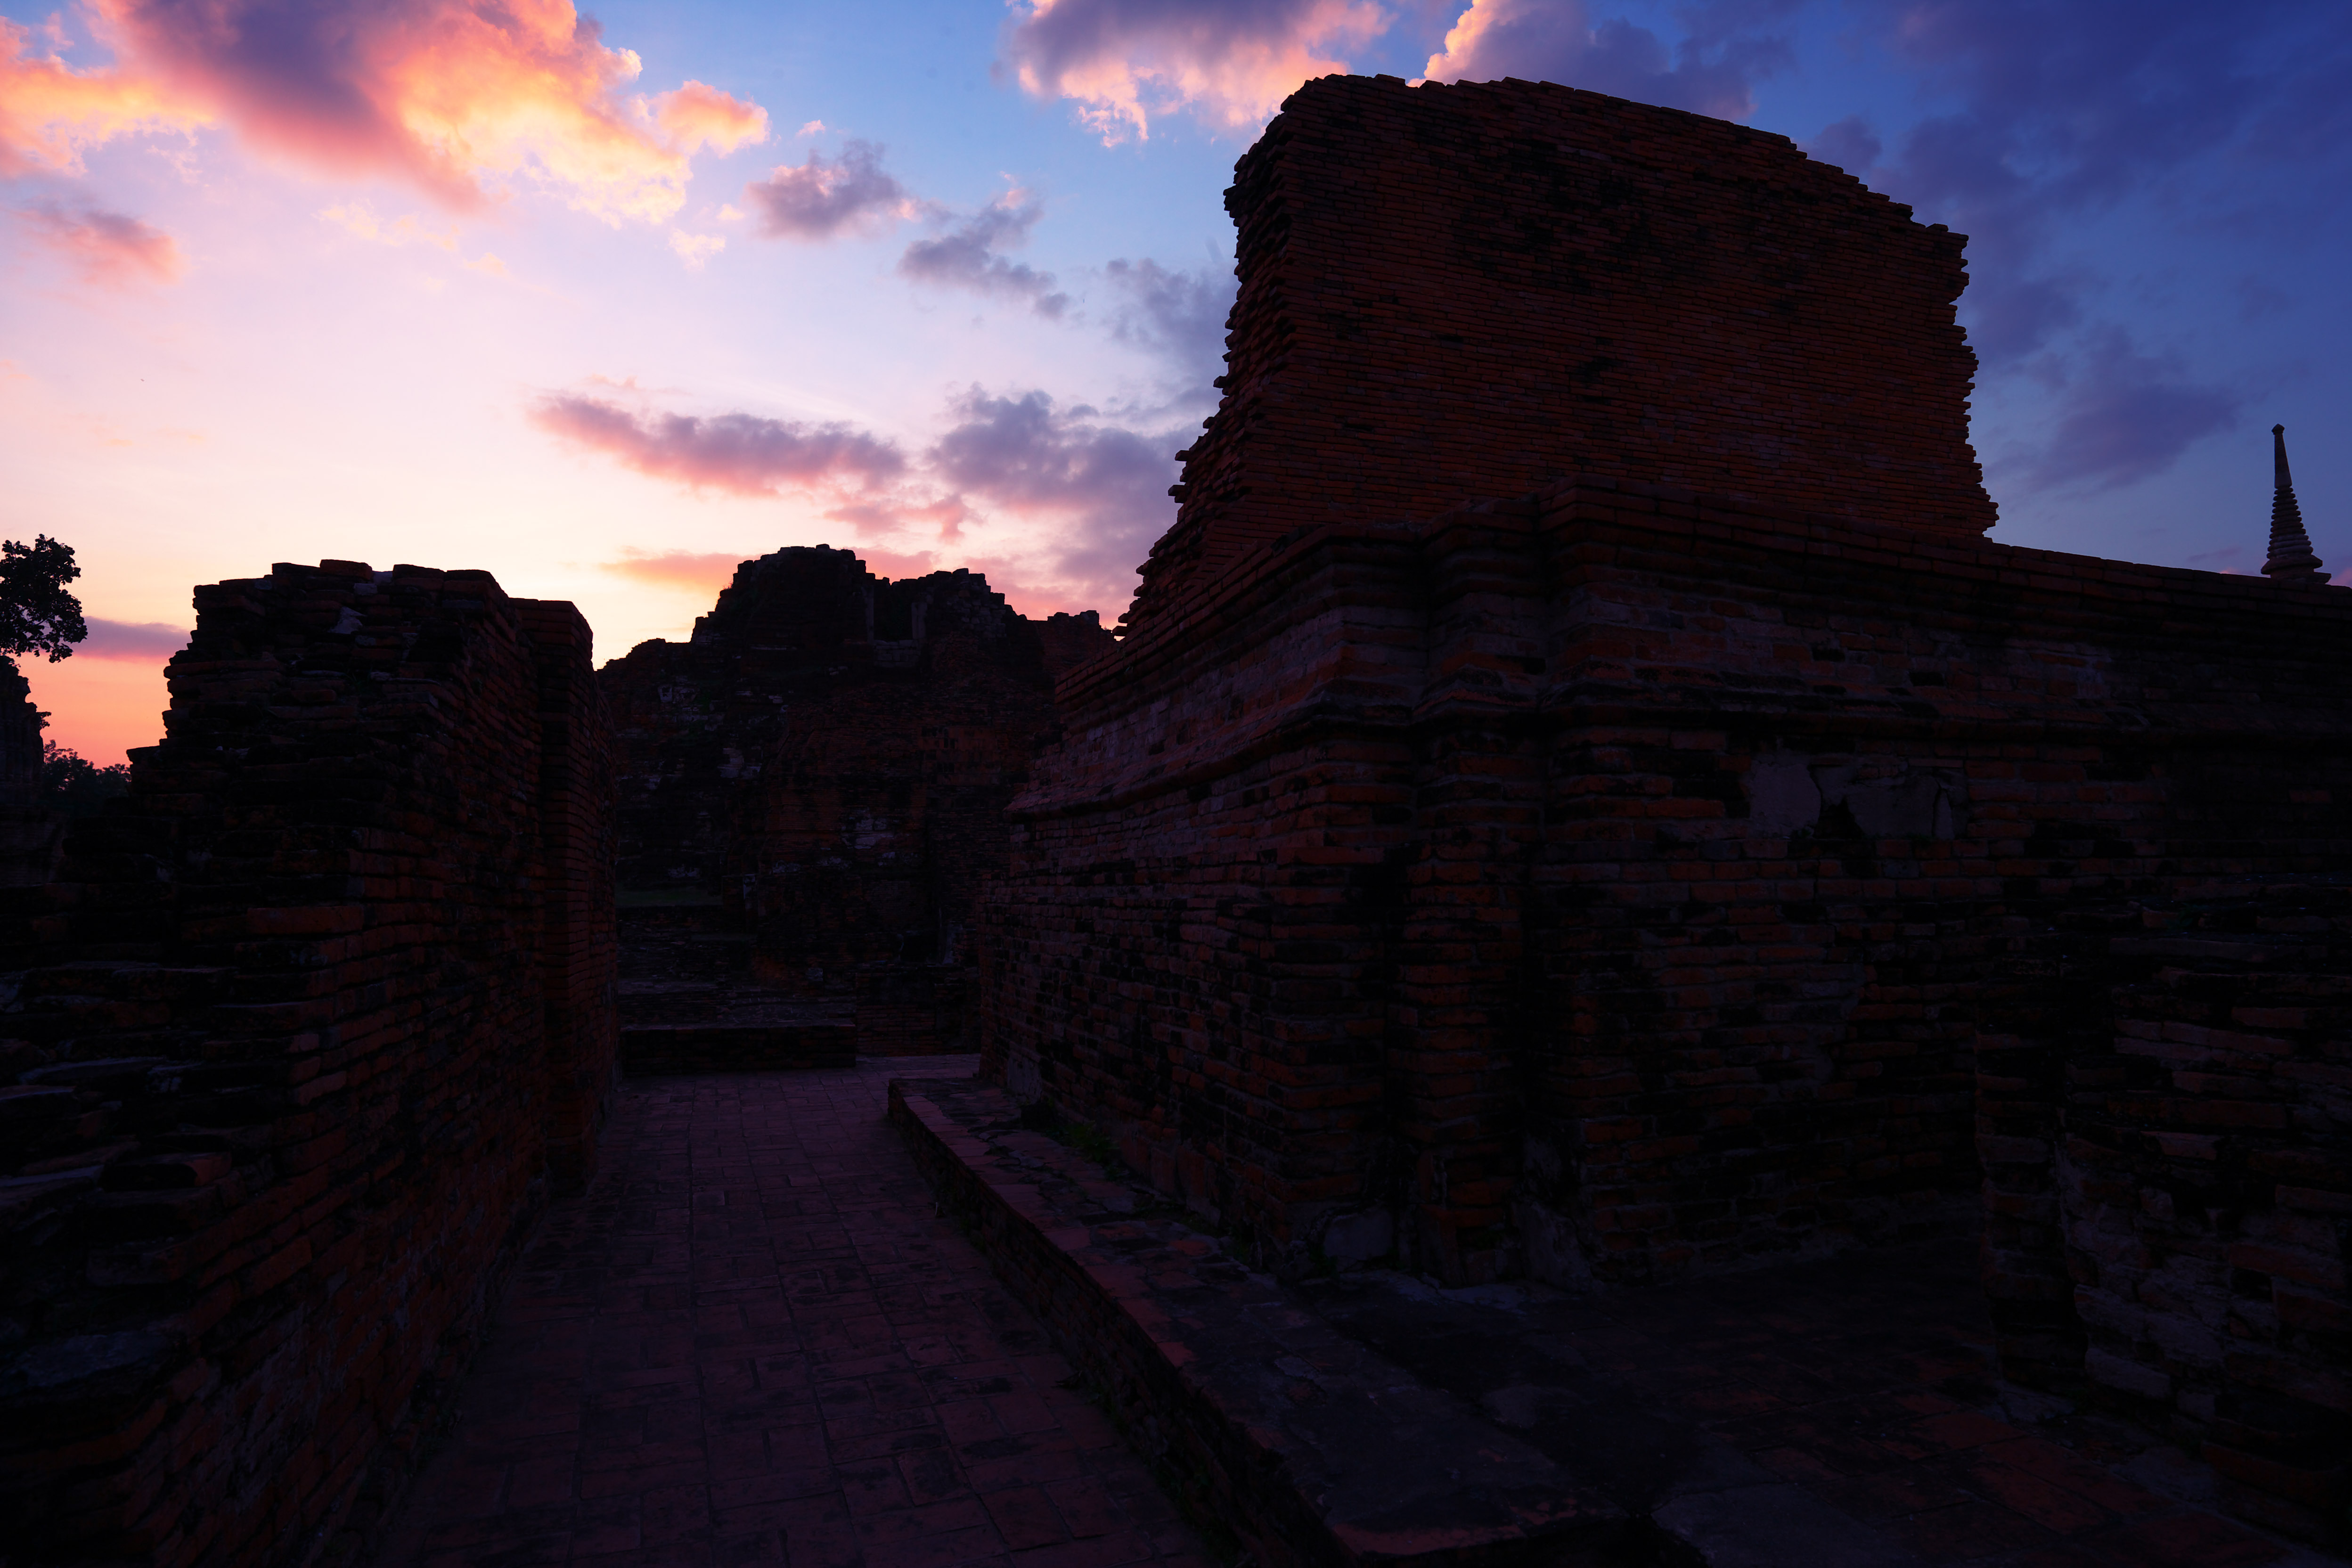 photo,material,free,landscape,picture,stock photo,Creative Commons,Dusk of Wat Phra Mahathat, World's cultural heritage, Buddhism, The ruins, Ayutthaya remains